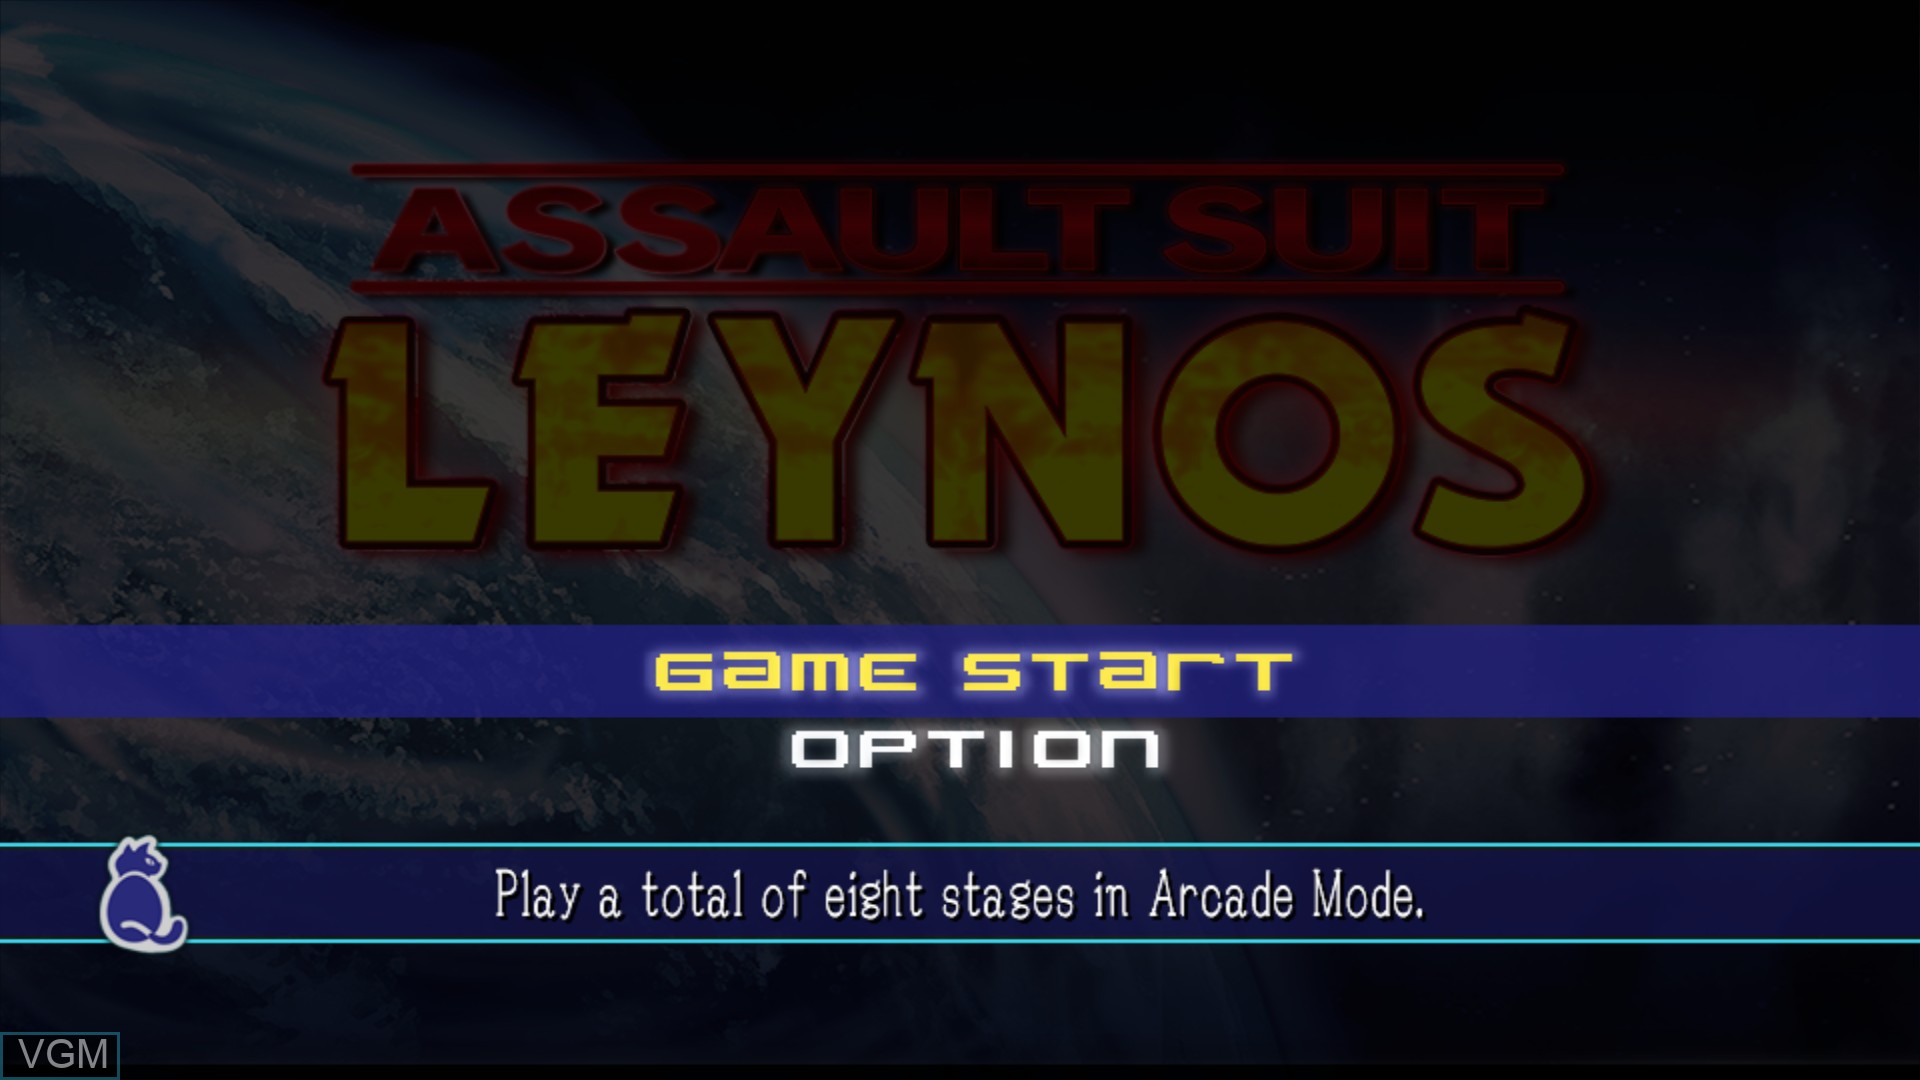 Menu screen of the game Assault Suit Leynos on Sony Playstation 4